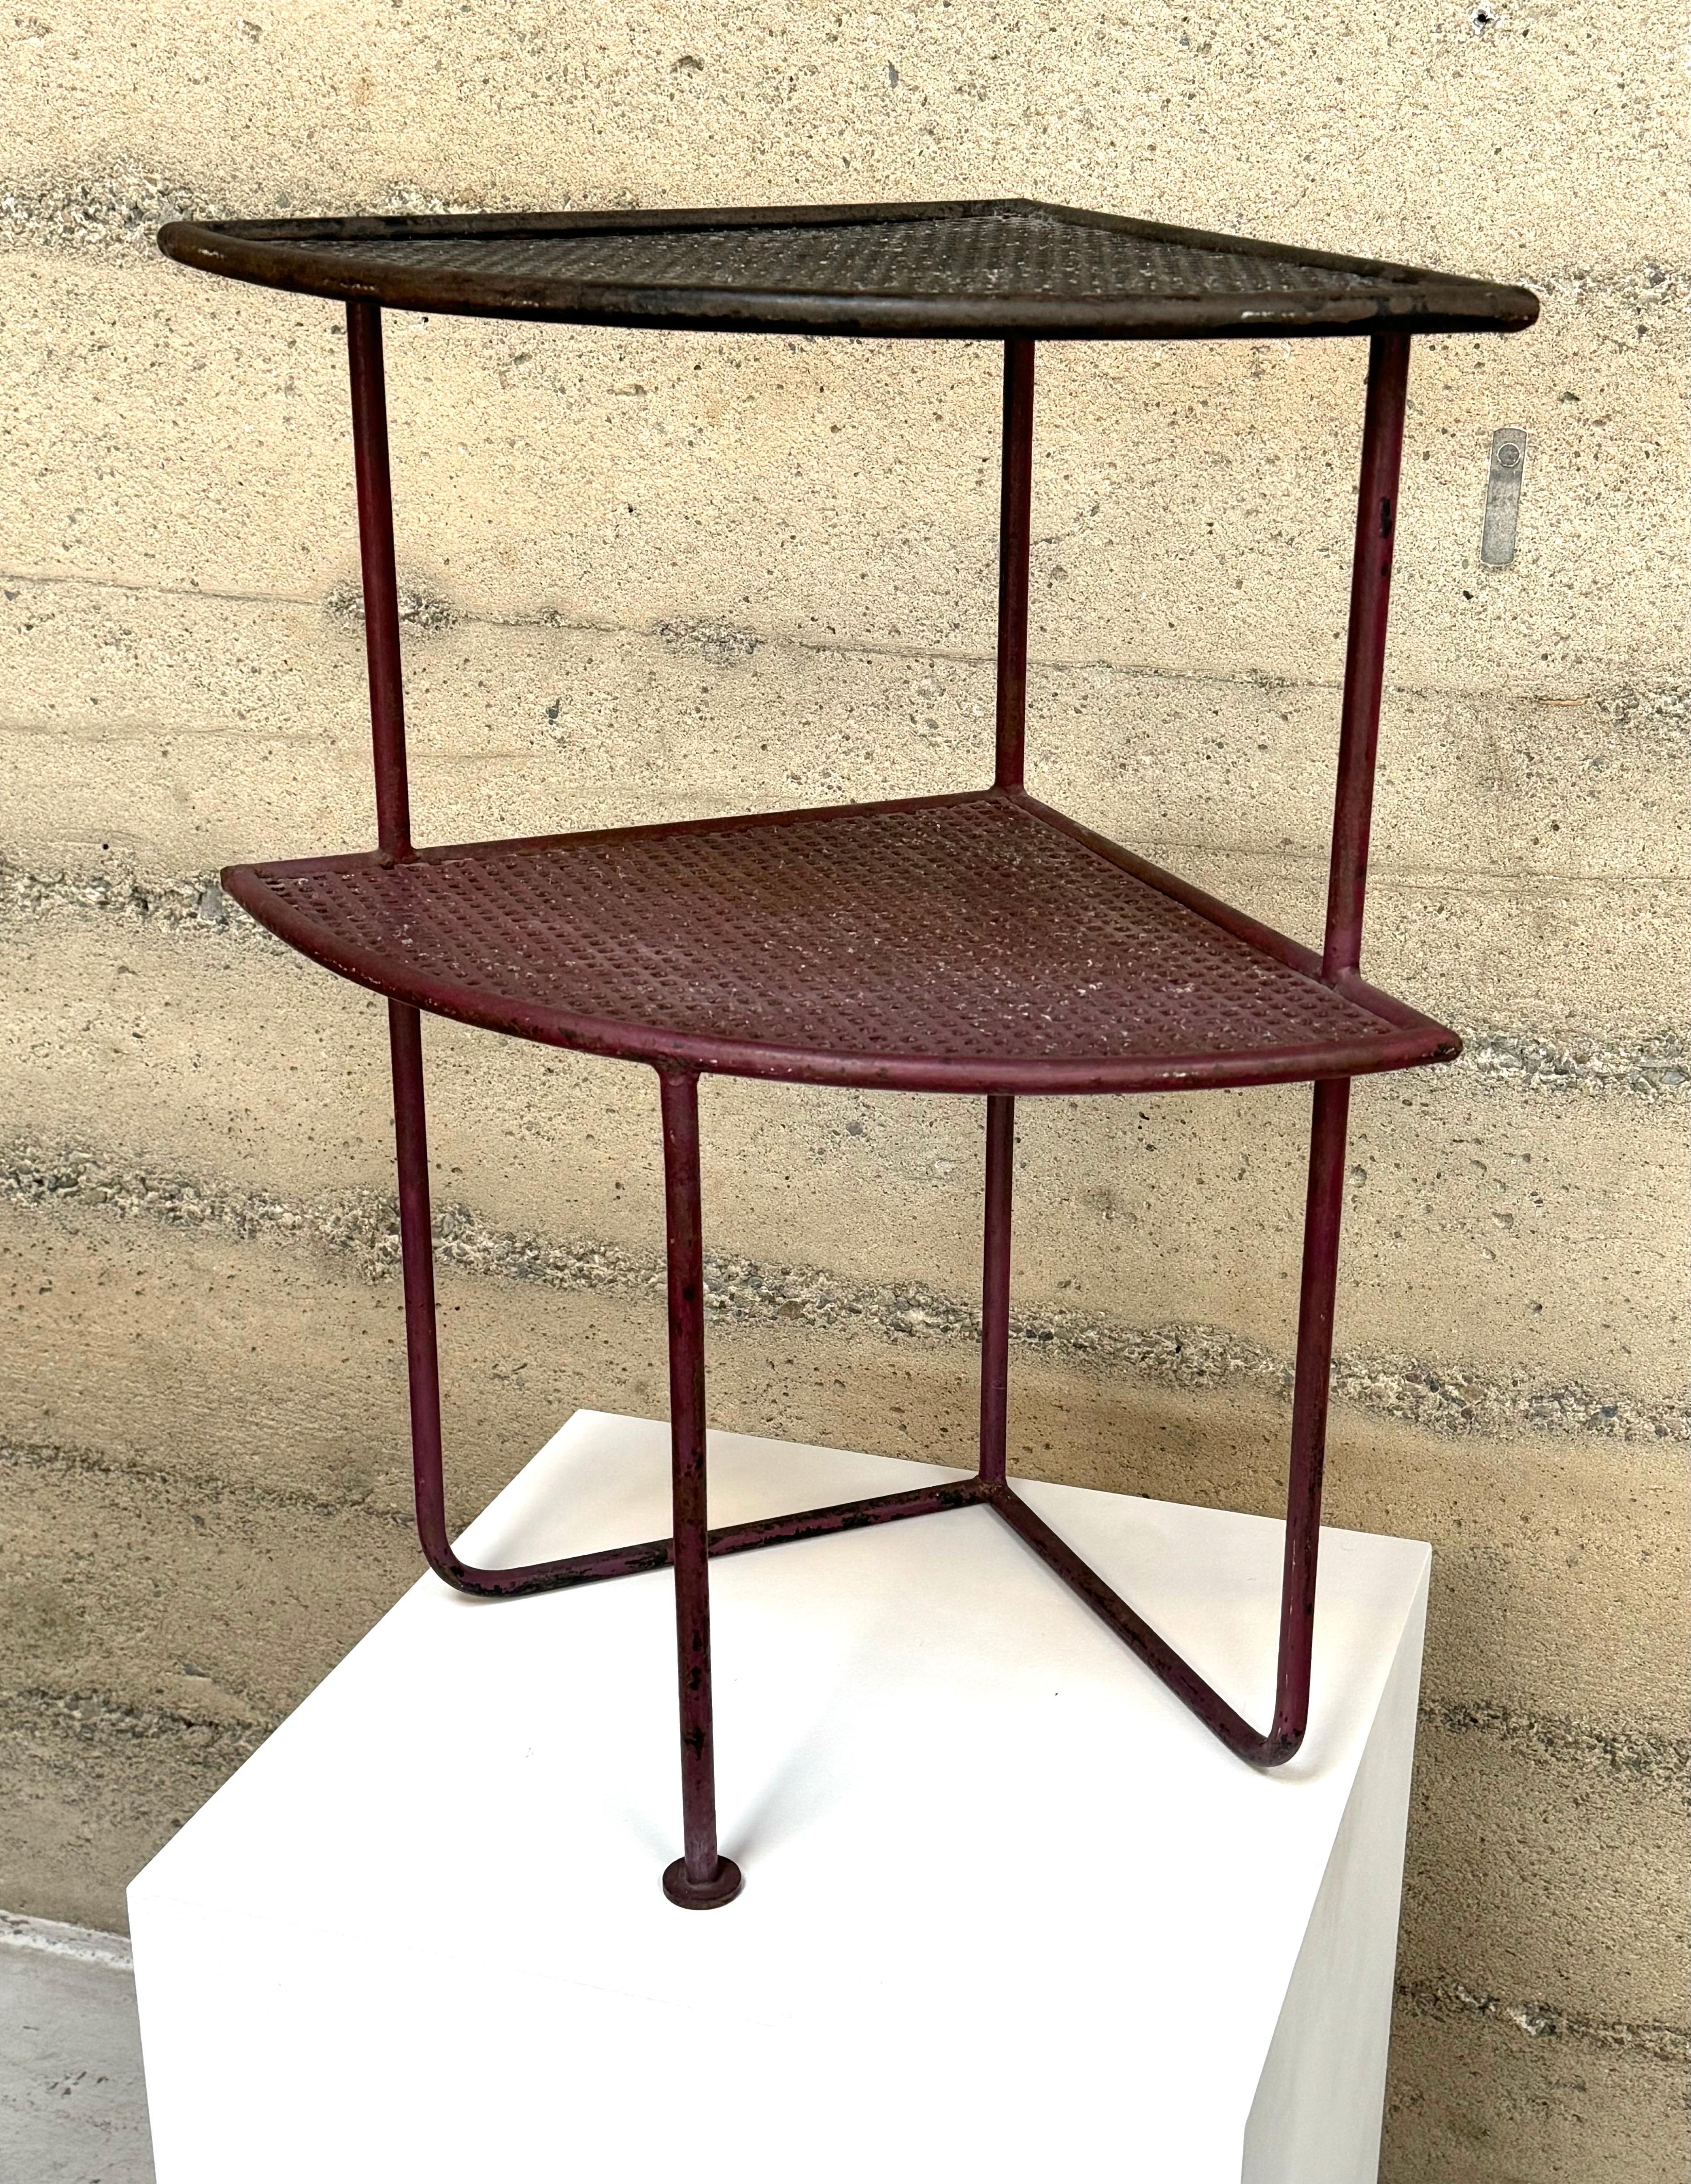 1950s Modernist French Iron with Perforated Metal Shelves Side Table 2